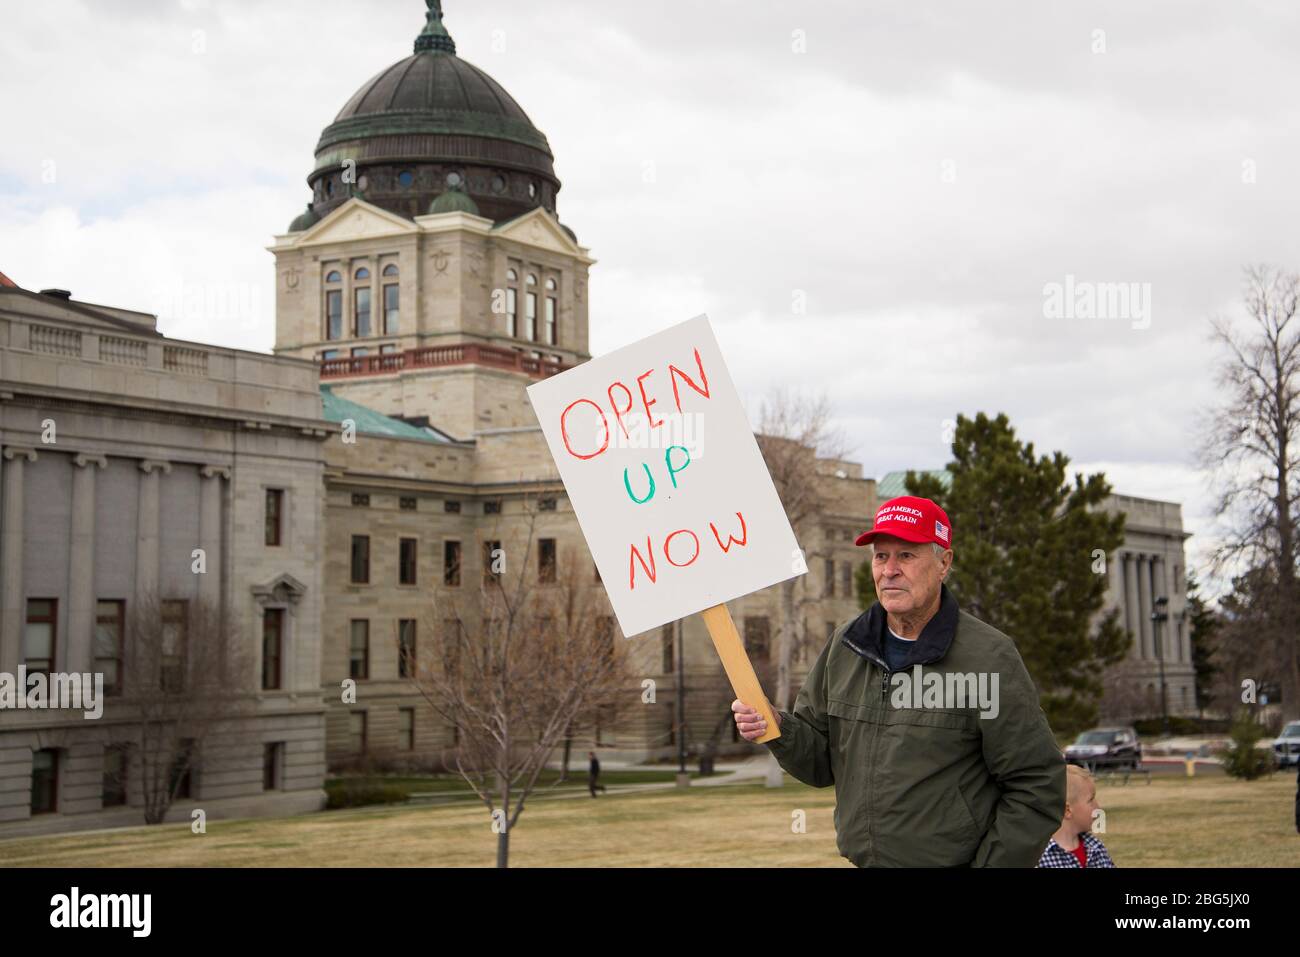 Helena, Montana - April 19, 2020: A senior citizen man protesting wearing a red Make America Great Again hat holding a sign saying to open up the gove Stock Photo